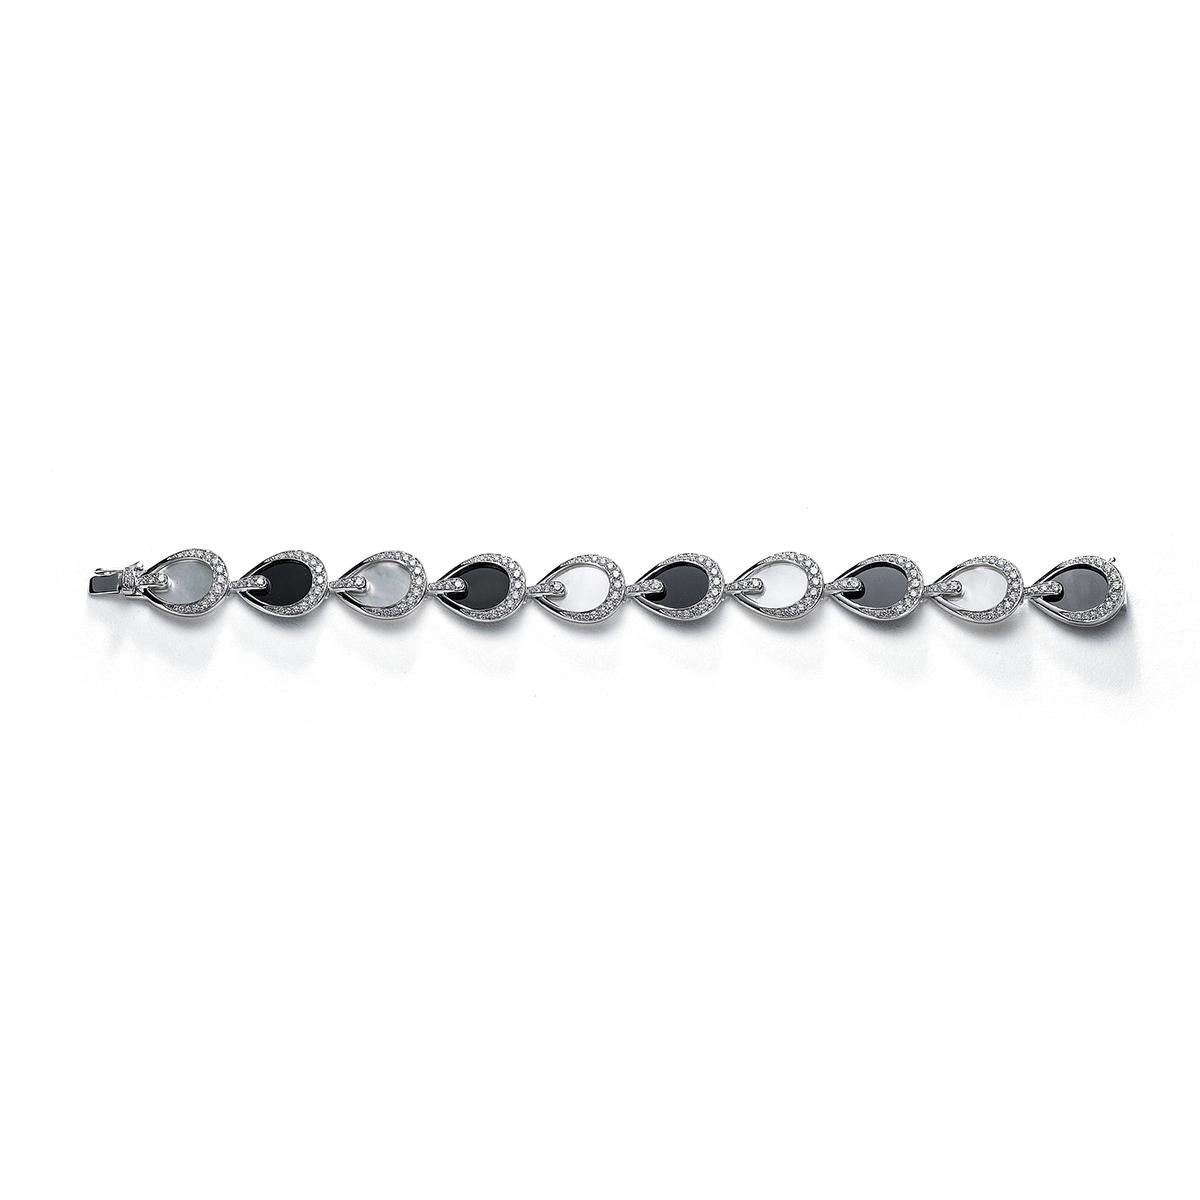 Bracelet in 18kt white gold set with 192 diamonds 2.34 cts, 5 mother-of-pearl 9.25 cts and 5 onyx 7.81 cts      